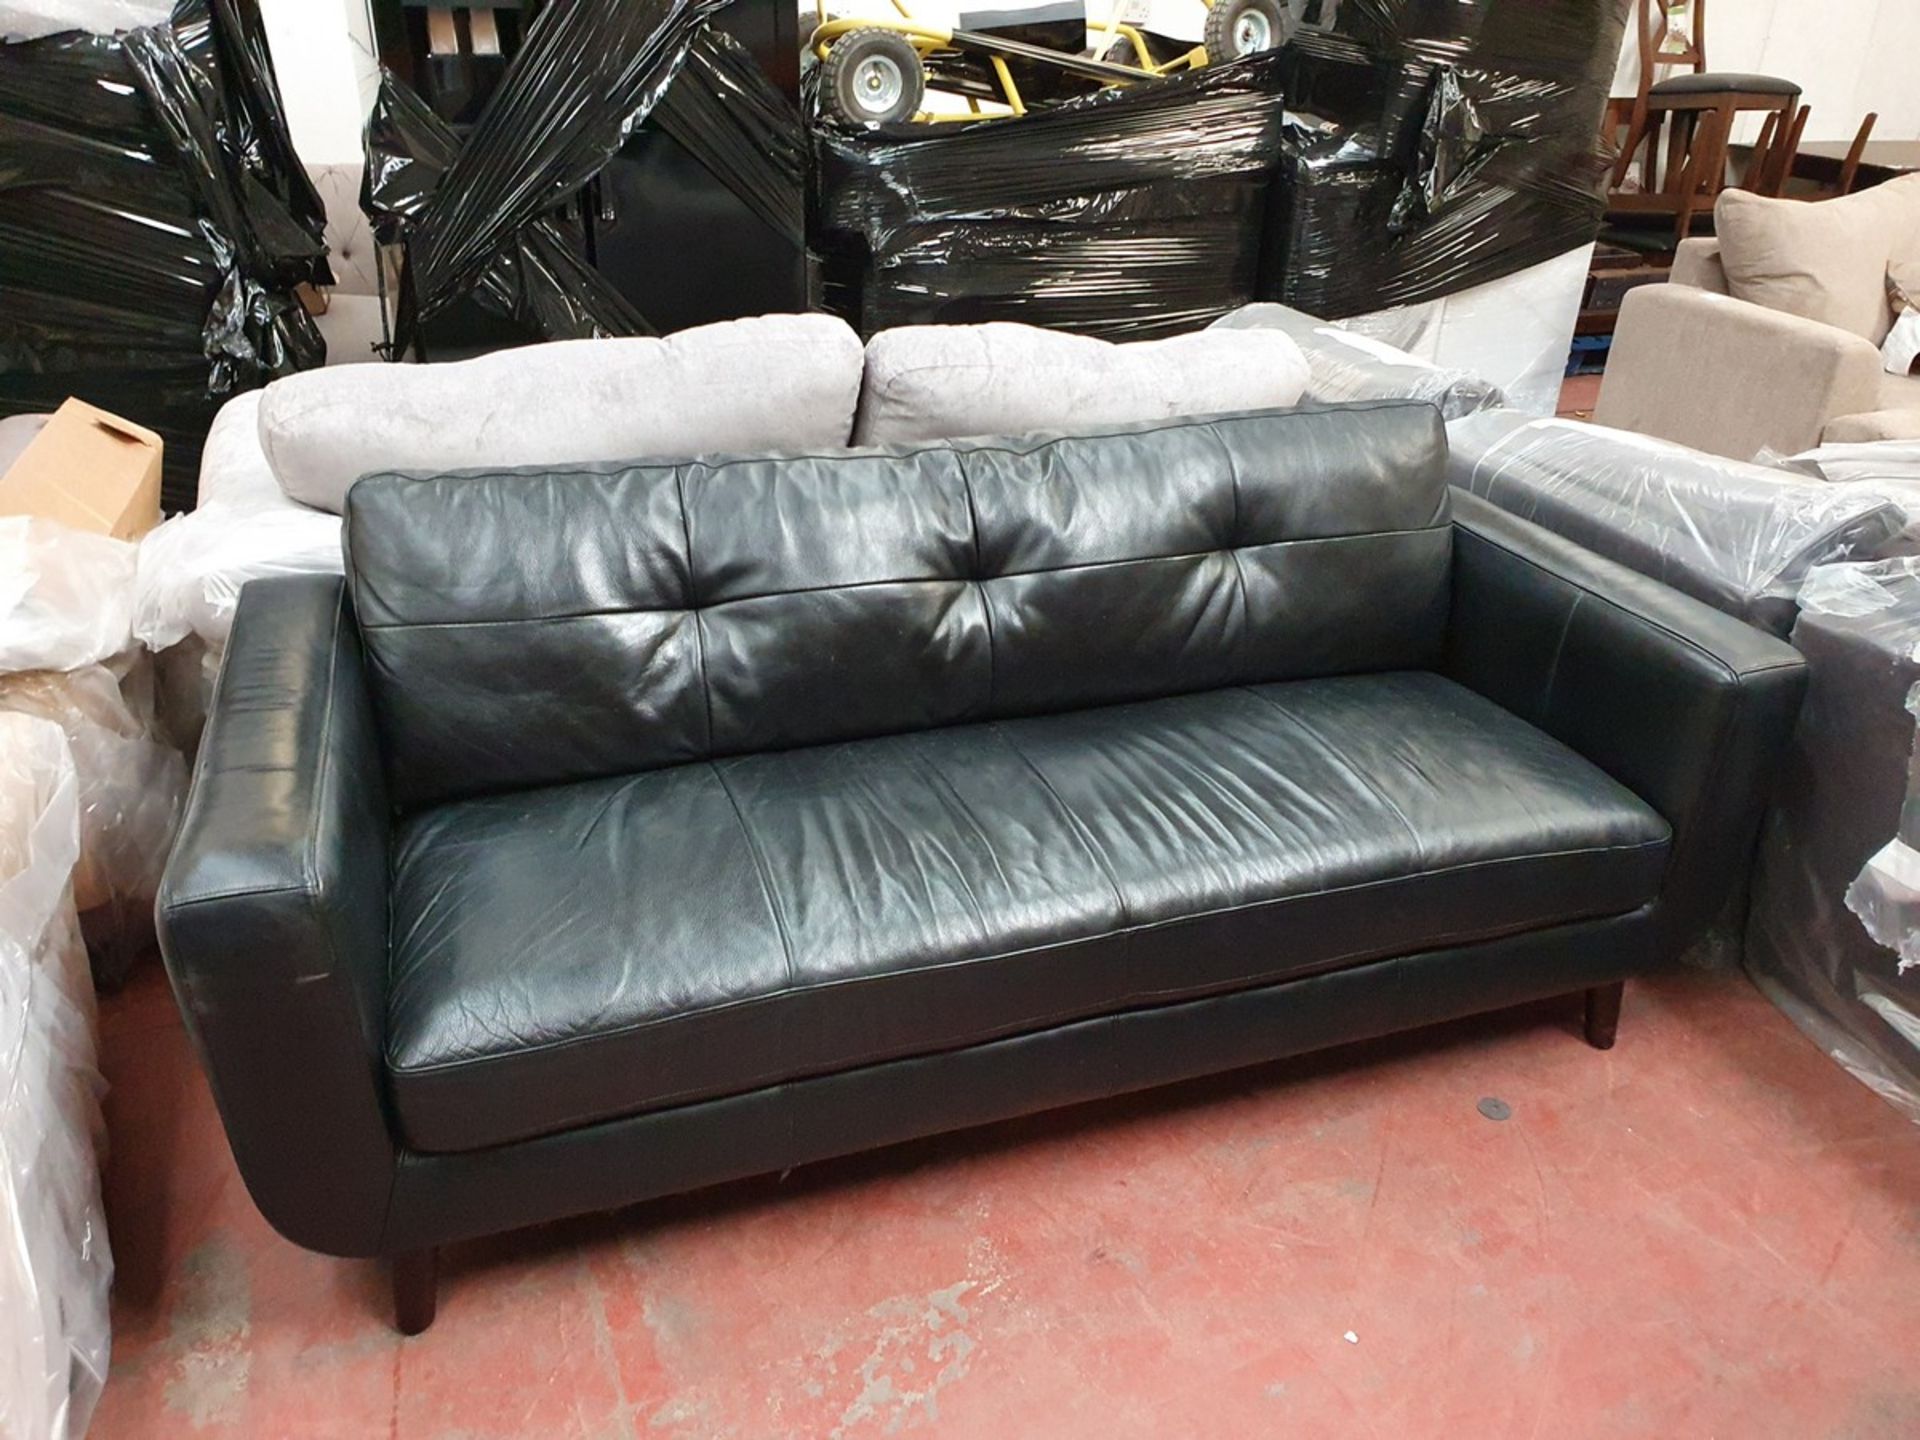 Lounge set of a 3 Seater Black Leather sofa with matching Arm chair, used with a few scratches and